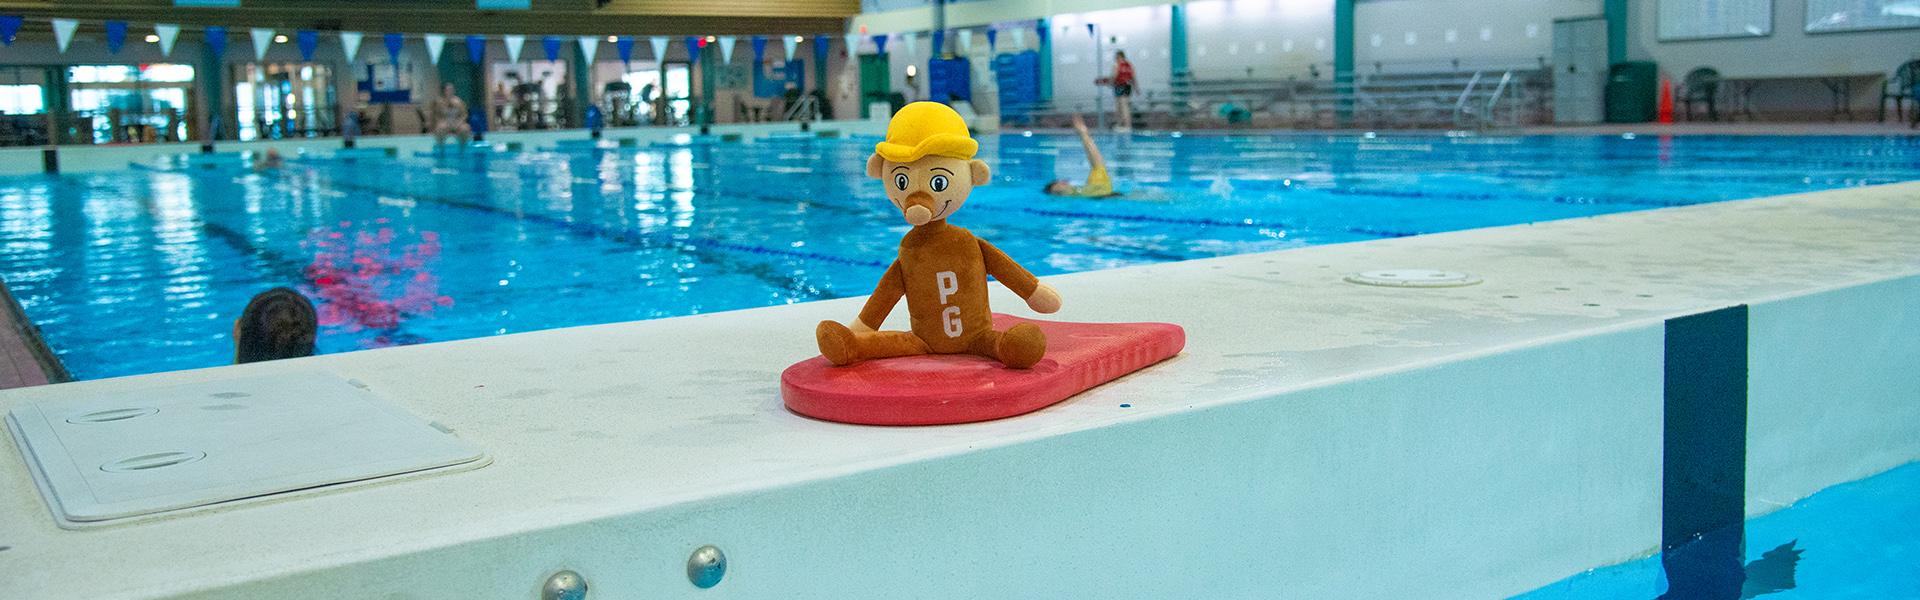 Stuffed toy of Mr PG resting on a pool floatation toy at the Prince George Aquatic Centre